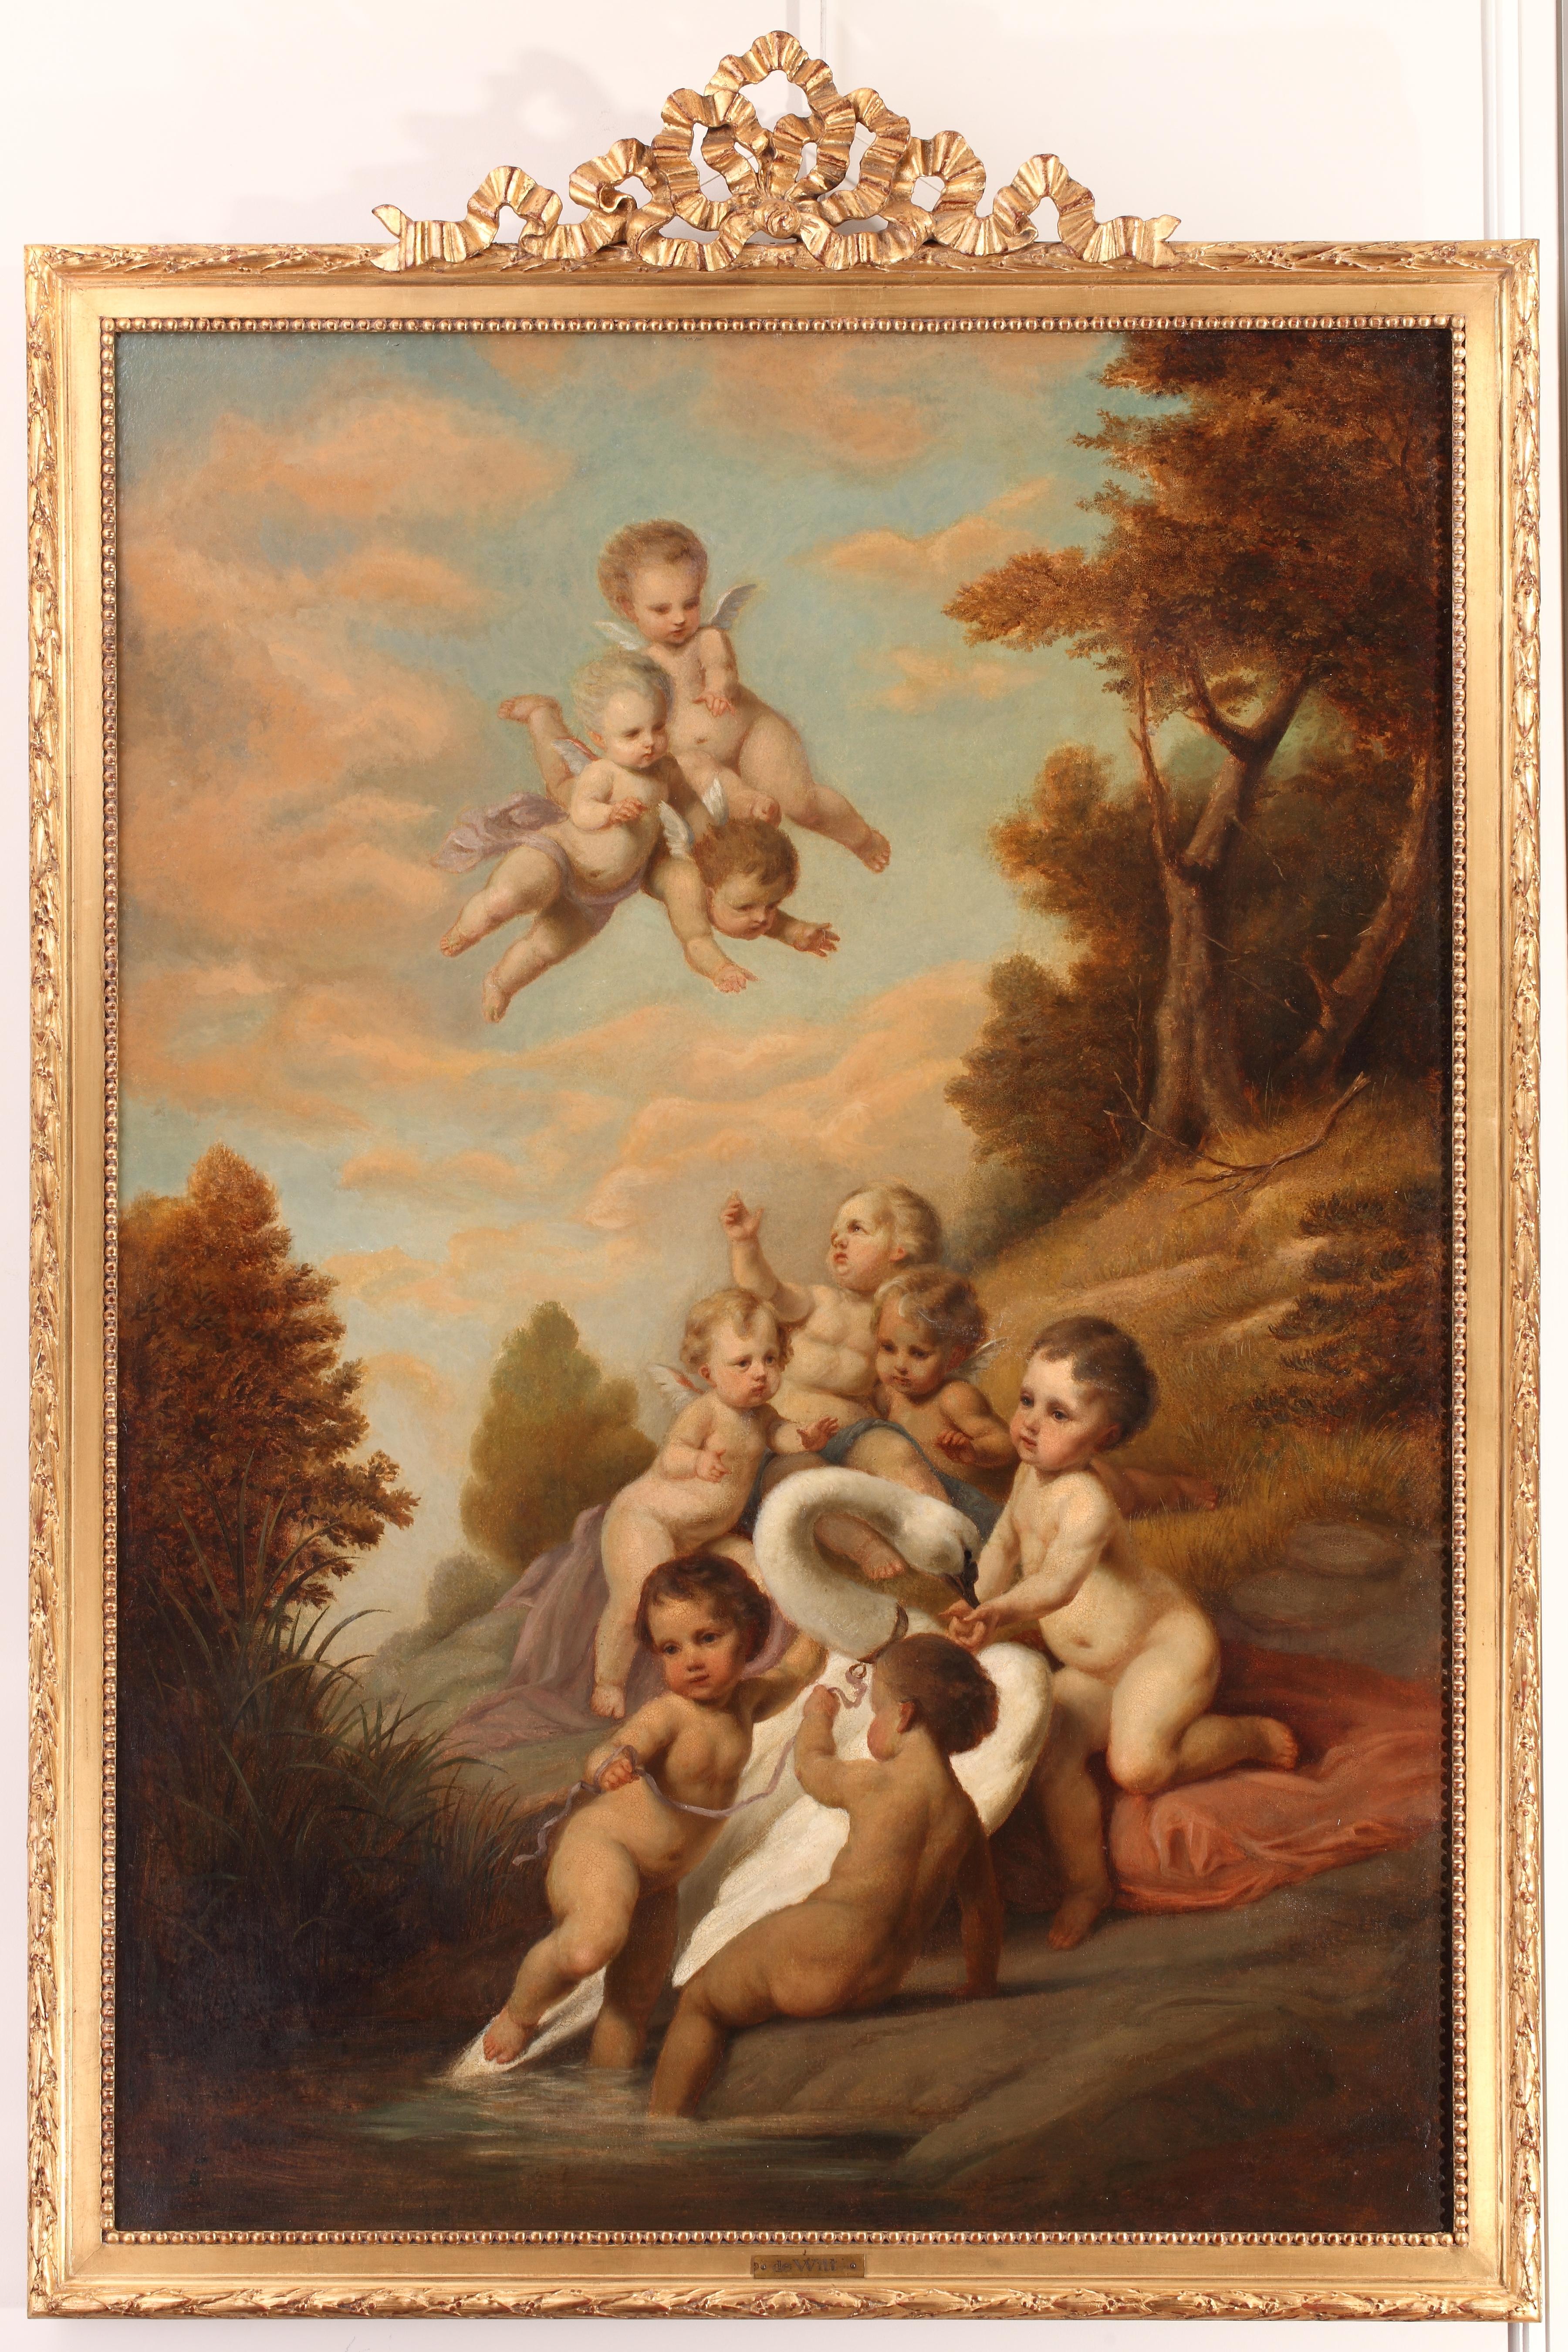 Pair of paintings inspired by the famous decorative repertoire of Jacob de Wit grisailles (1695-1754) in which playing putti are depicted in the centre of idyllic compositions.

Related work :
Jacob de Witt (1695-1754), “Allegory of four seasons